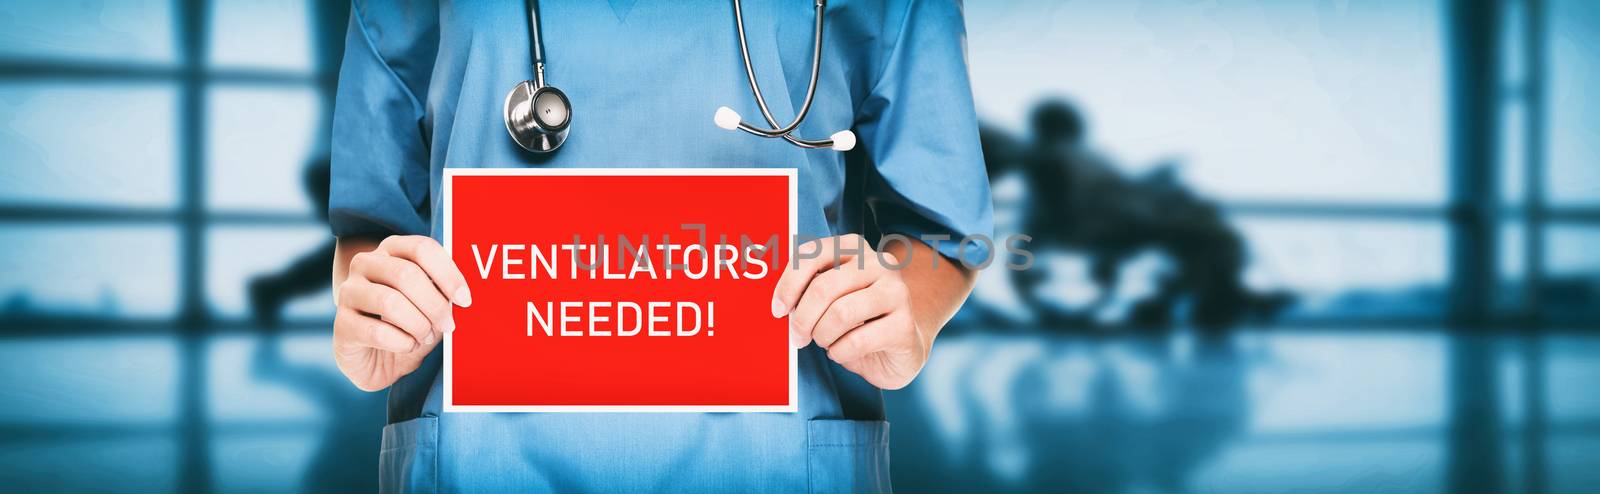 COVID-19 Ventilators needed urgency. Medical doctor or nurse showing sign asking for help holding red billboard with white text. Panoramic corona virus sign banner with title by Maridav